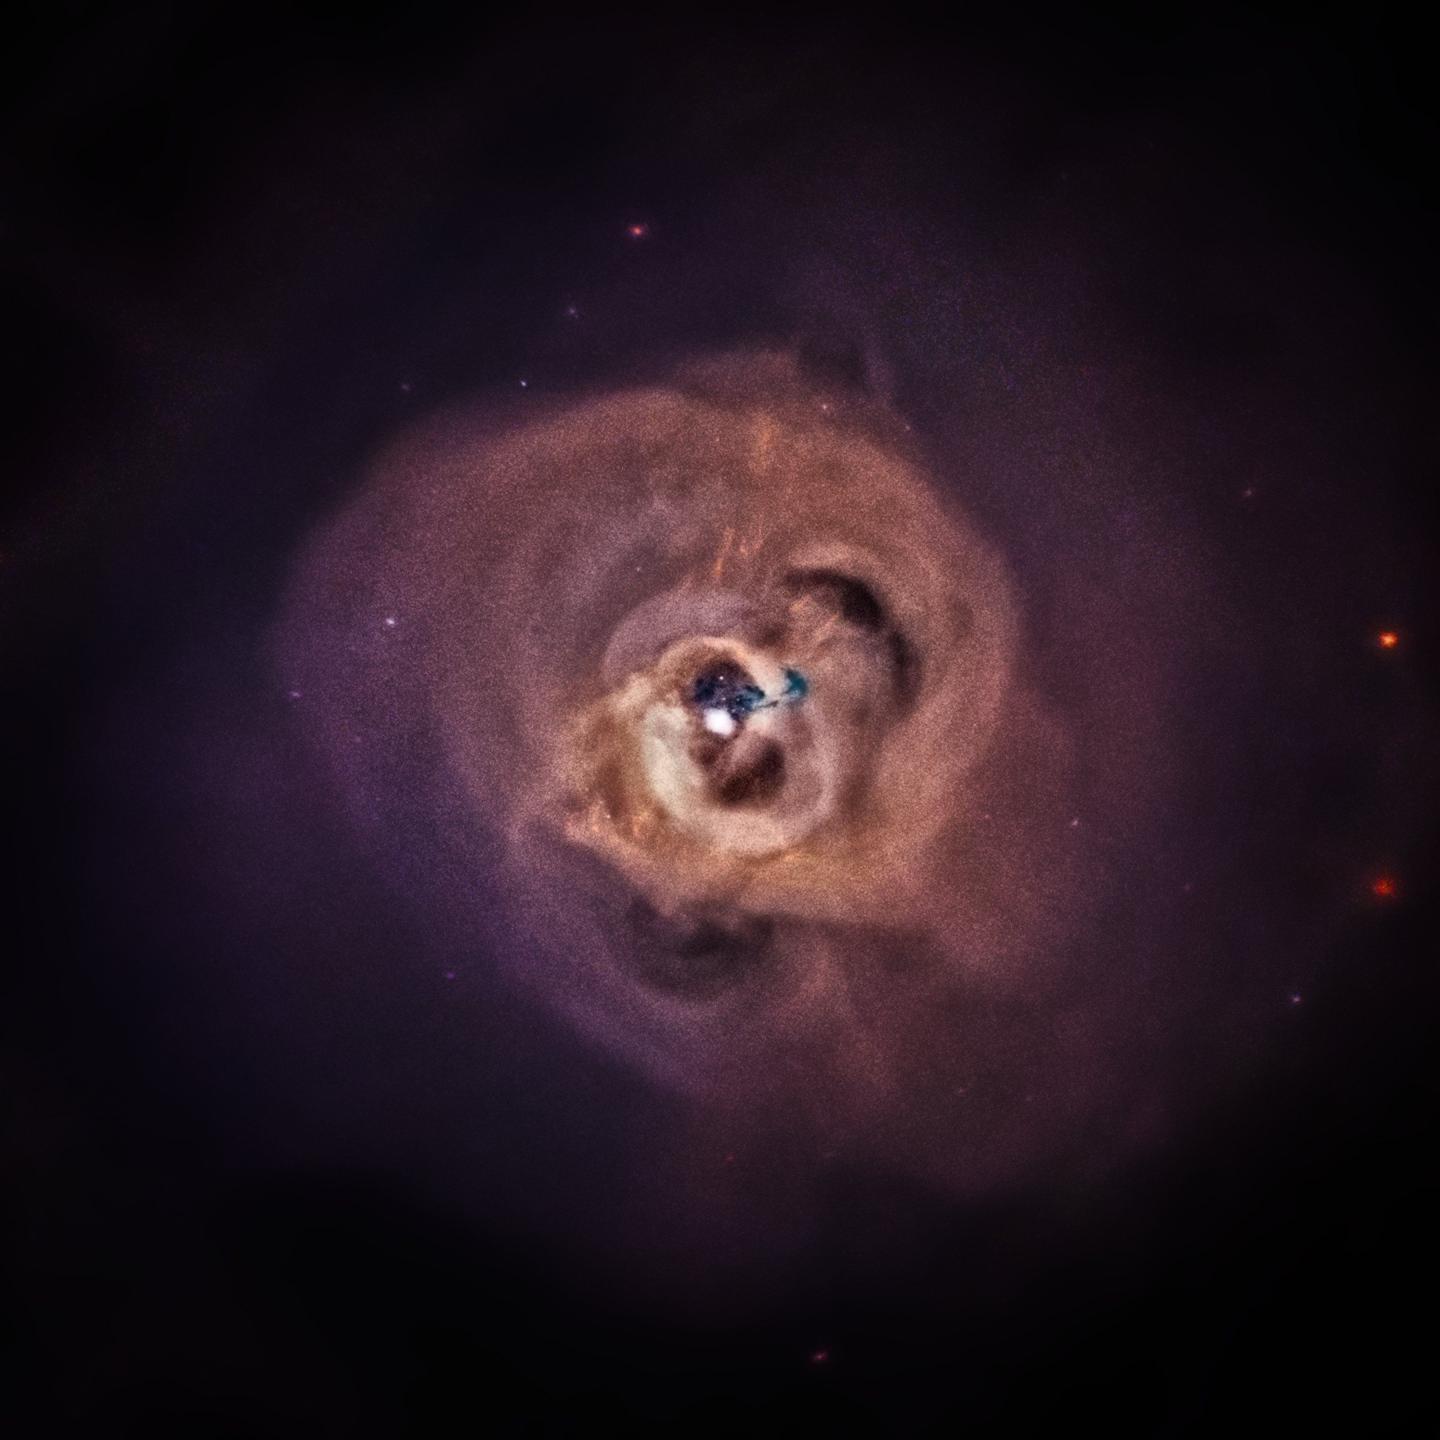 X-Ray Image of the Perseus Galaxy Cluster